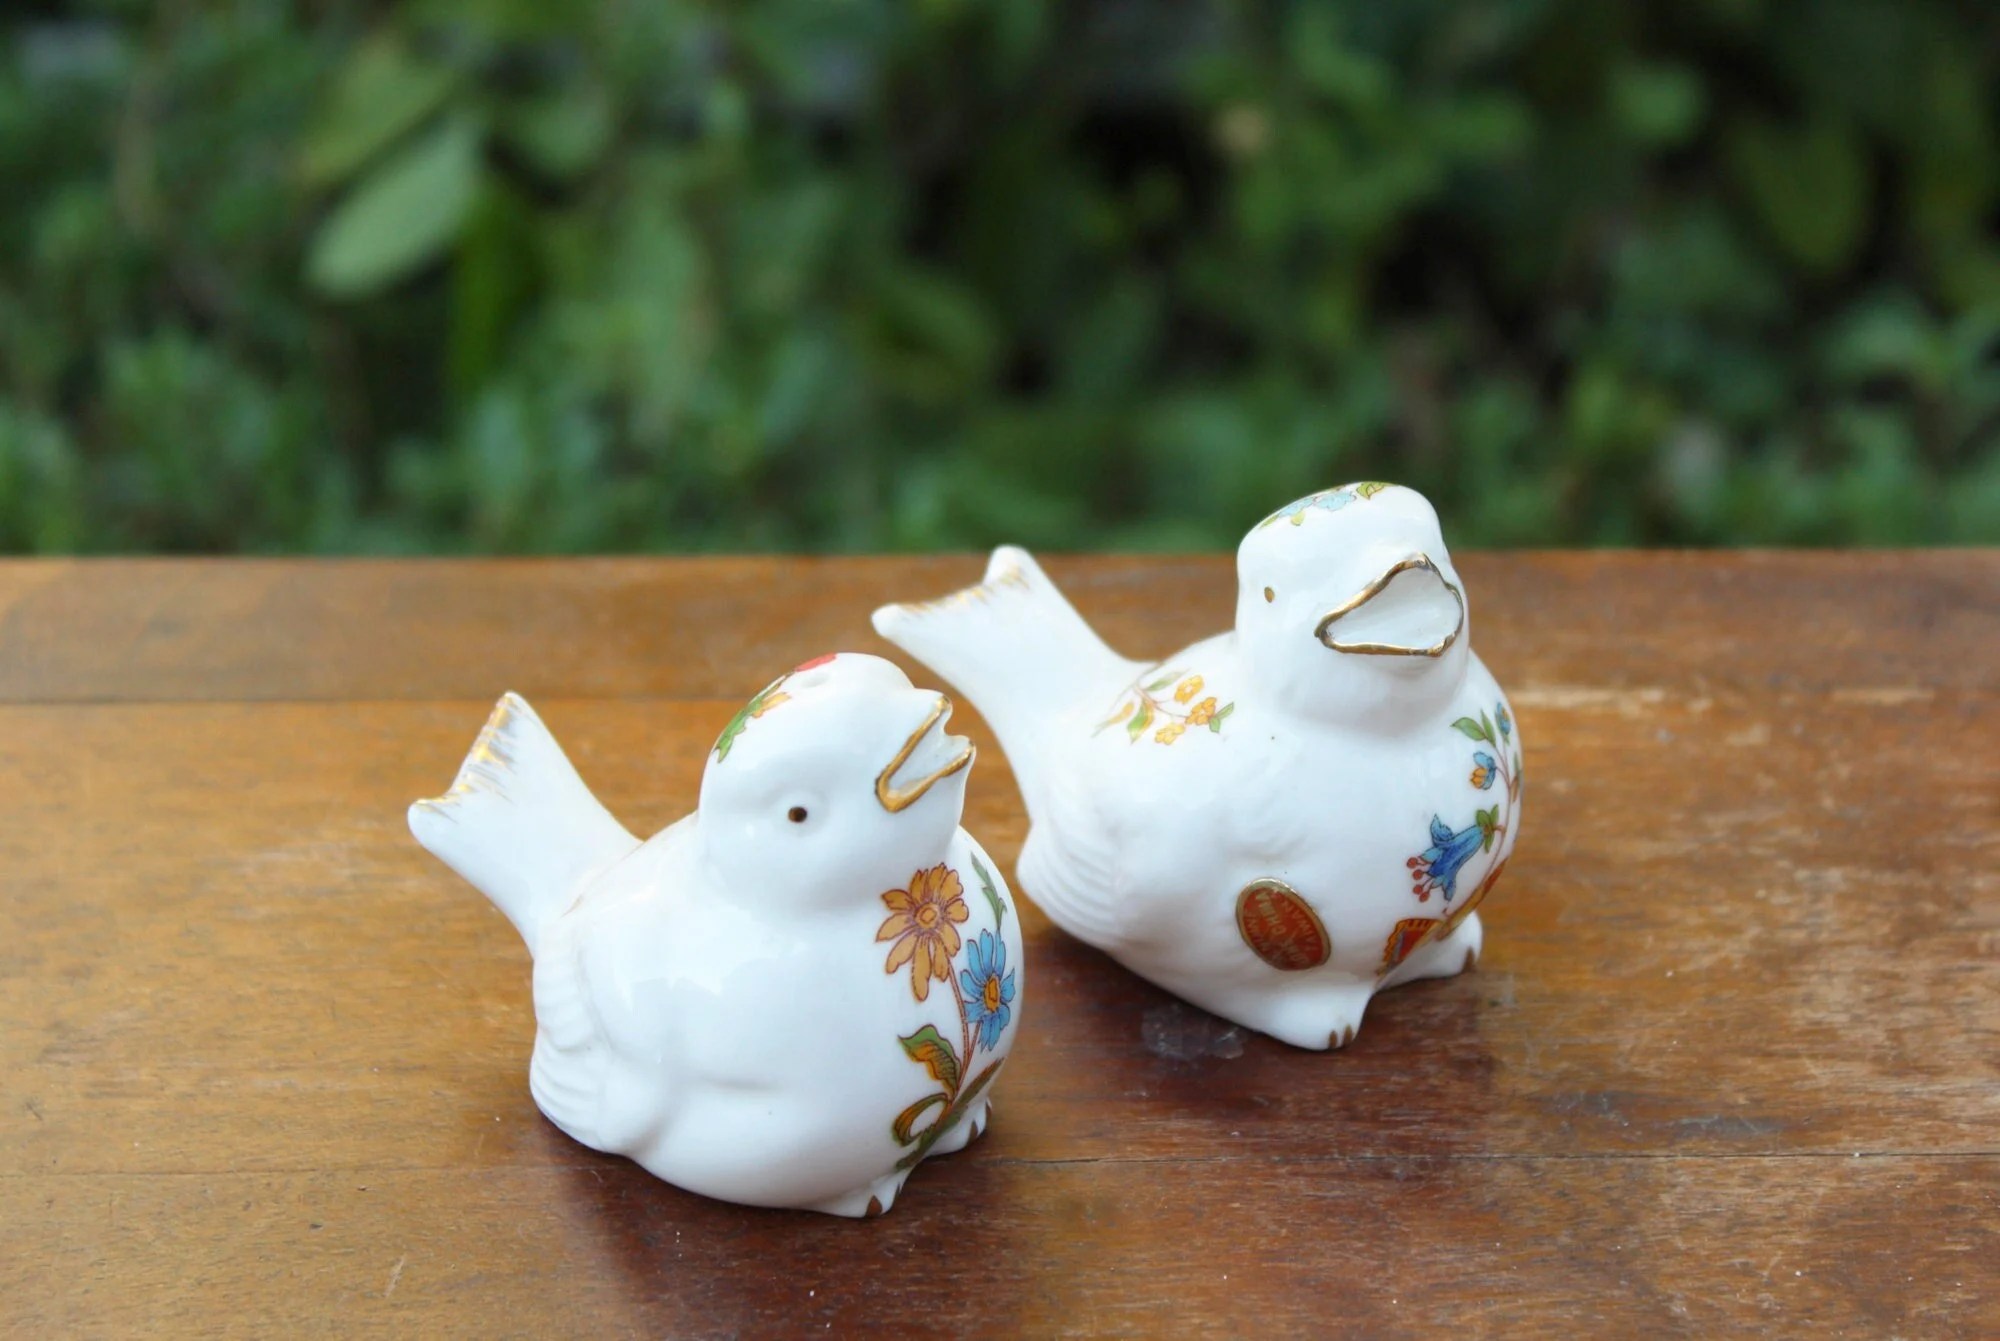 Bone China Floral Birds Salt and Pepper Spice S&P Shakers with Gold Trim and Floral Design - Farmhouse, Country, Cottage, Retro, Taiwan